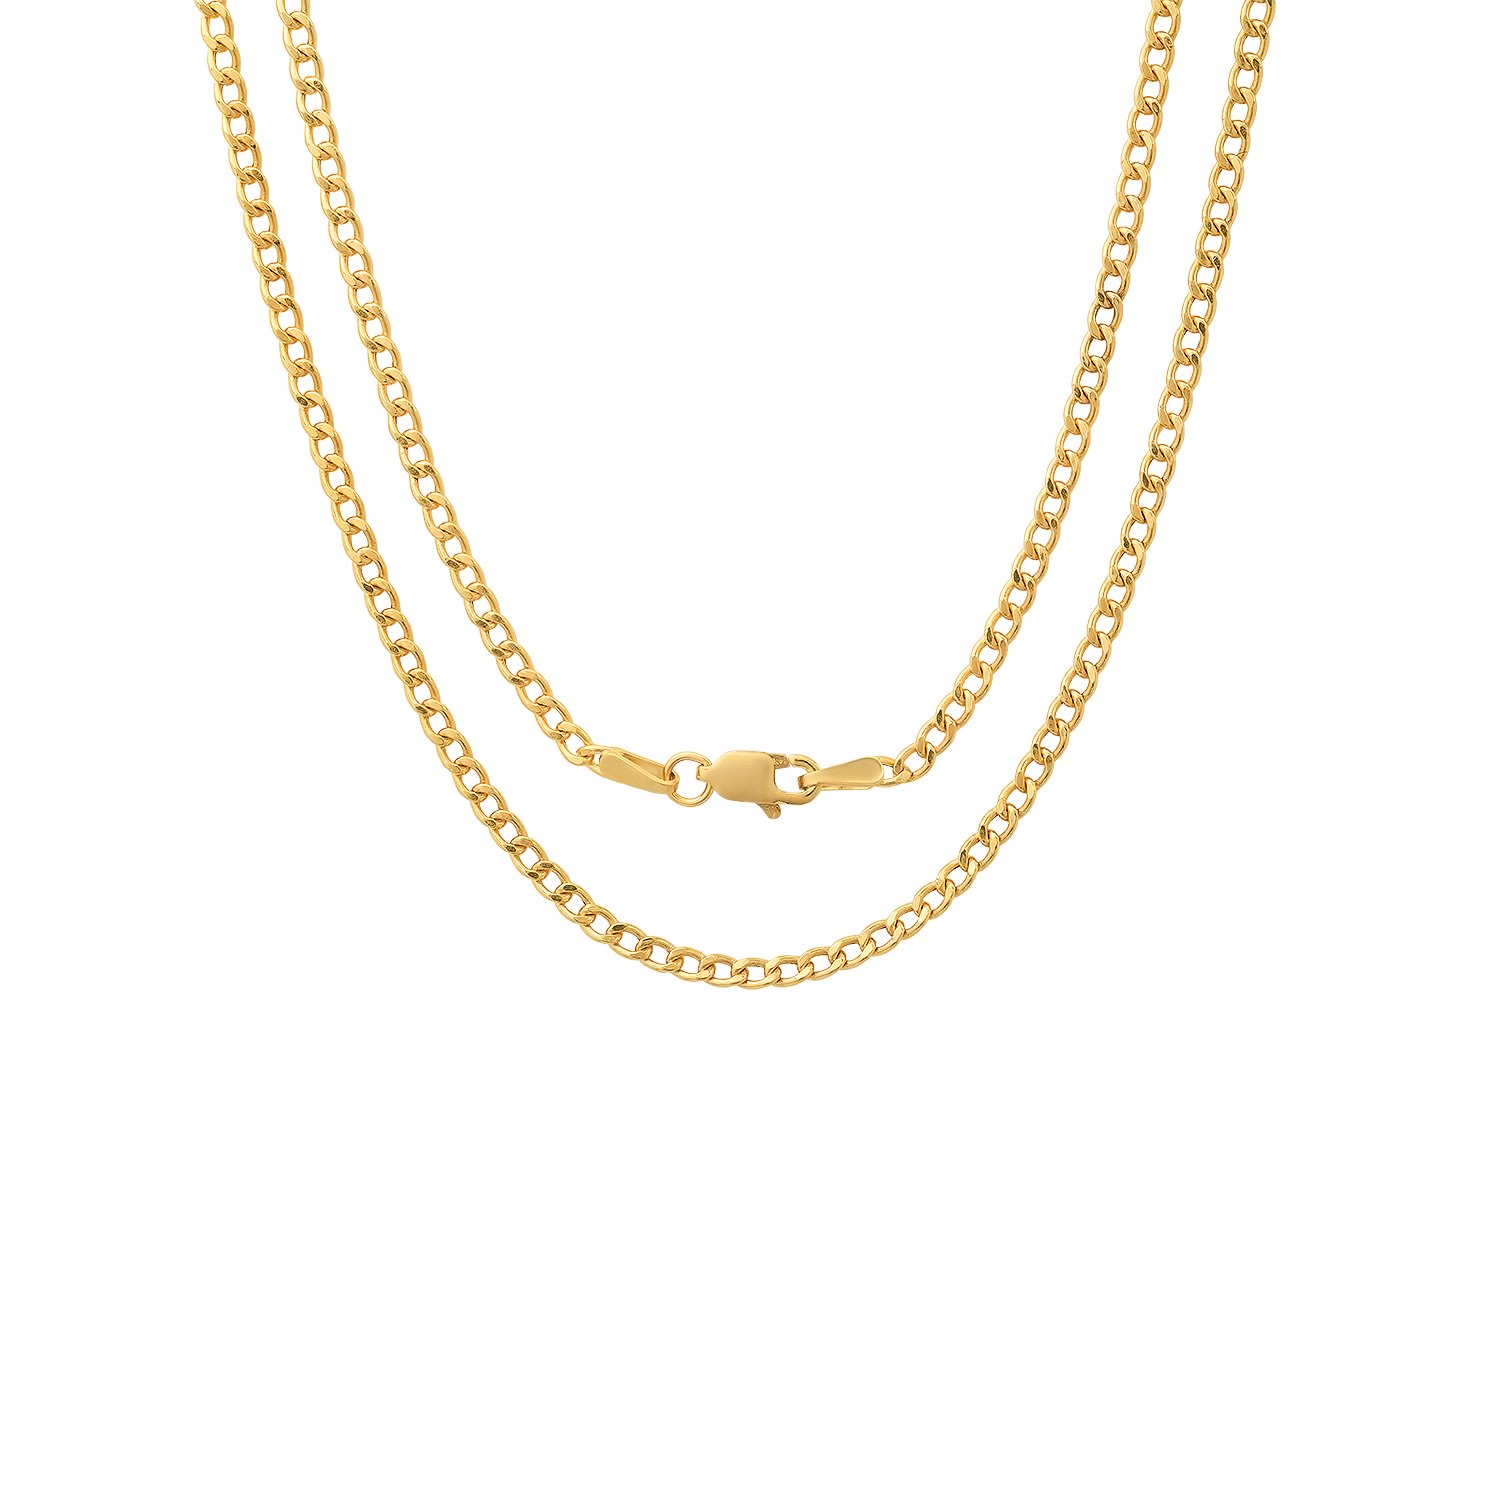 Kylie Harper Women's Solid Gold Miami Cuban Curb Chain Necklace